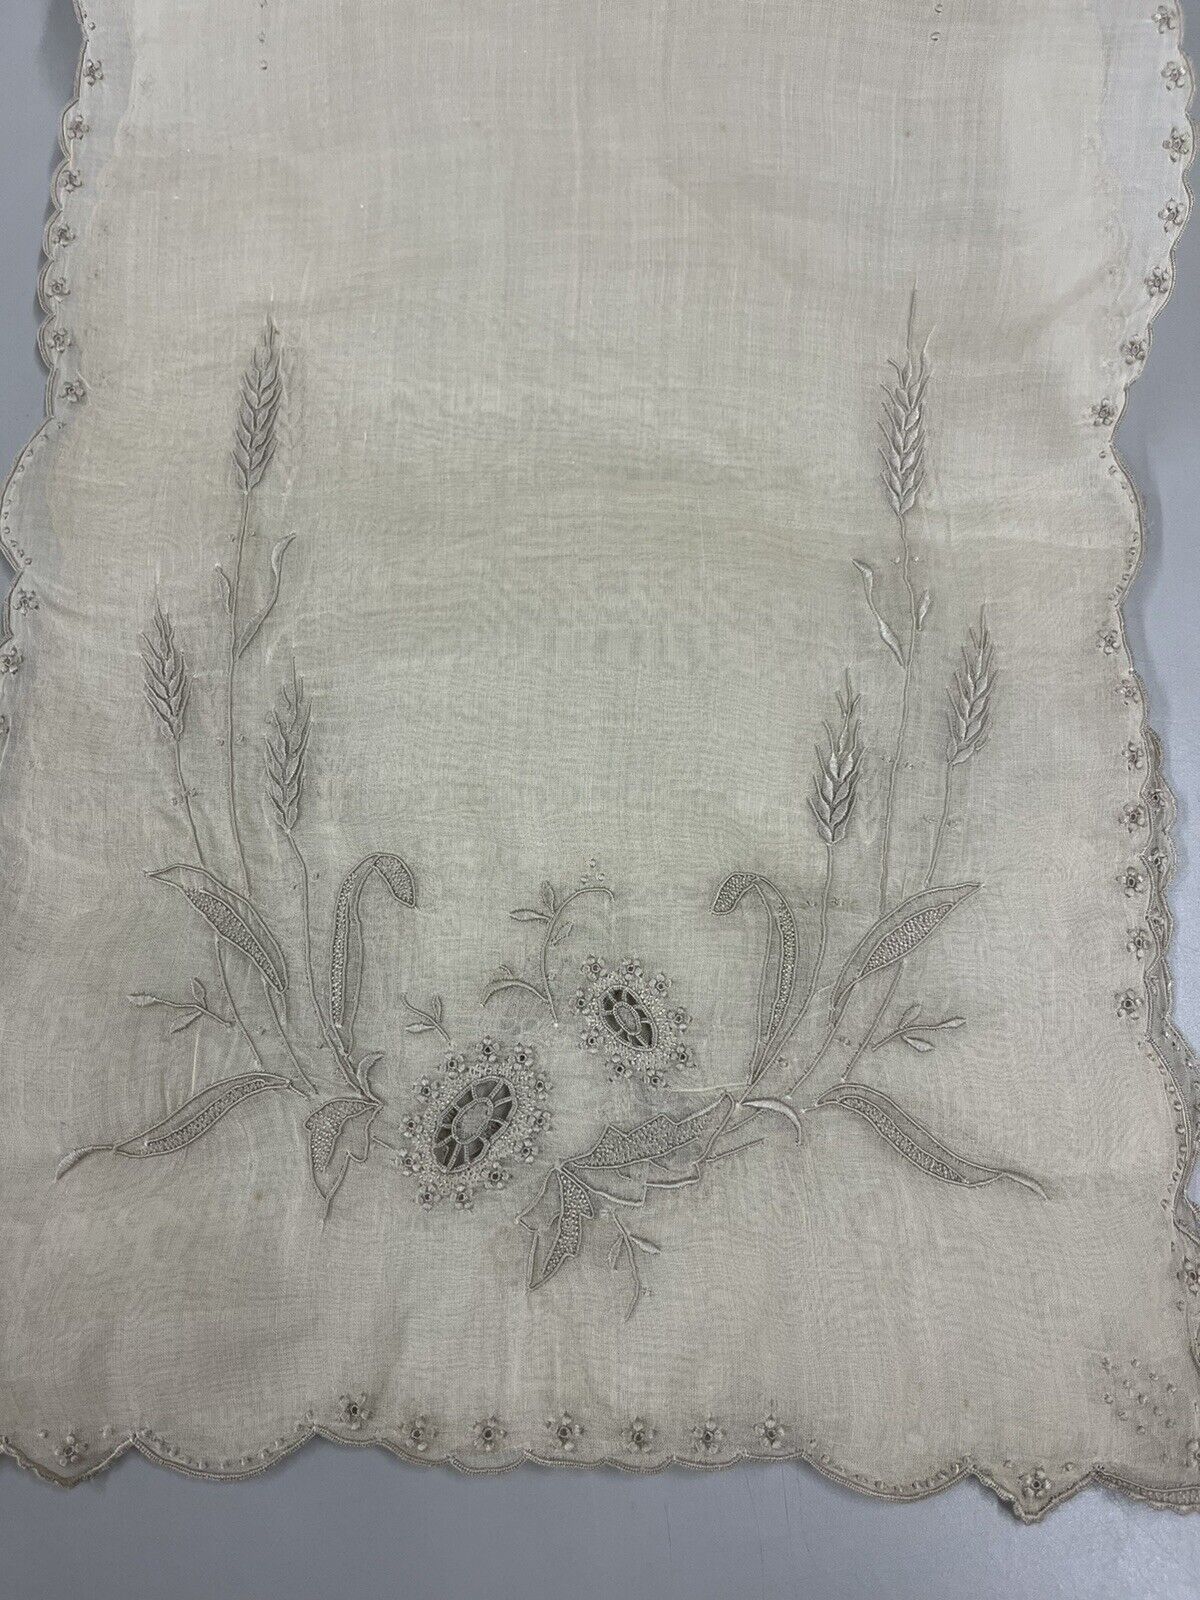 Madeira Style Sheer Floral Embroidered Cutwork Table Runner/Dresser Scarf 11x36\